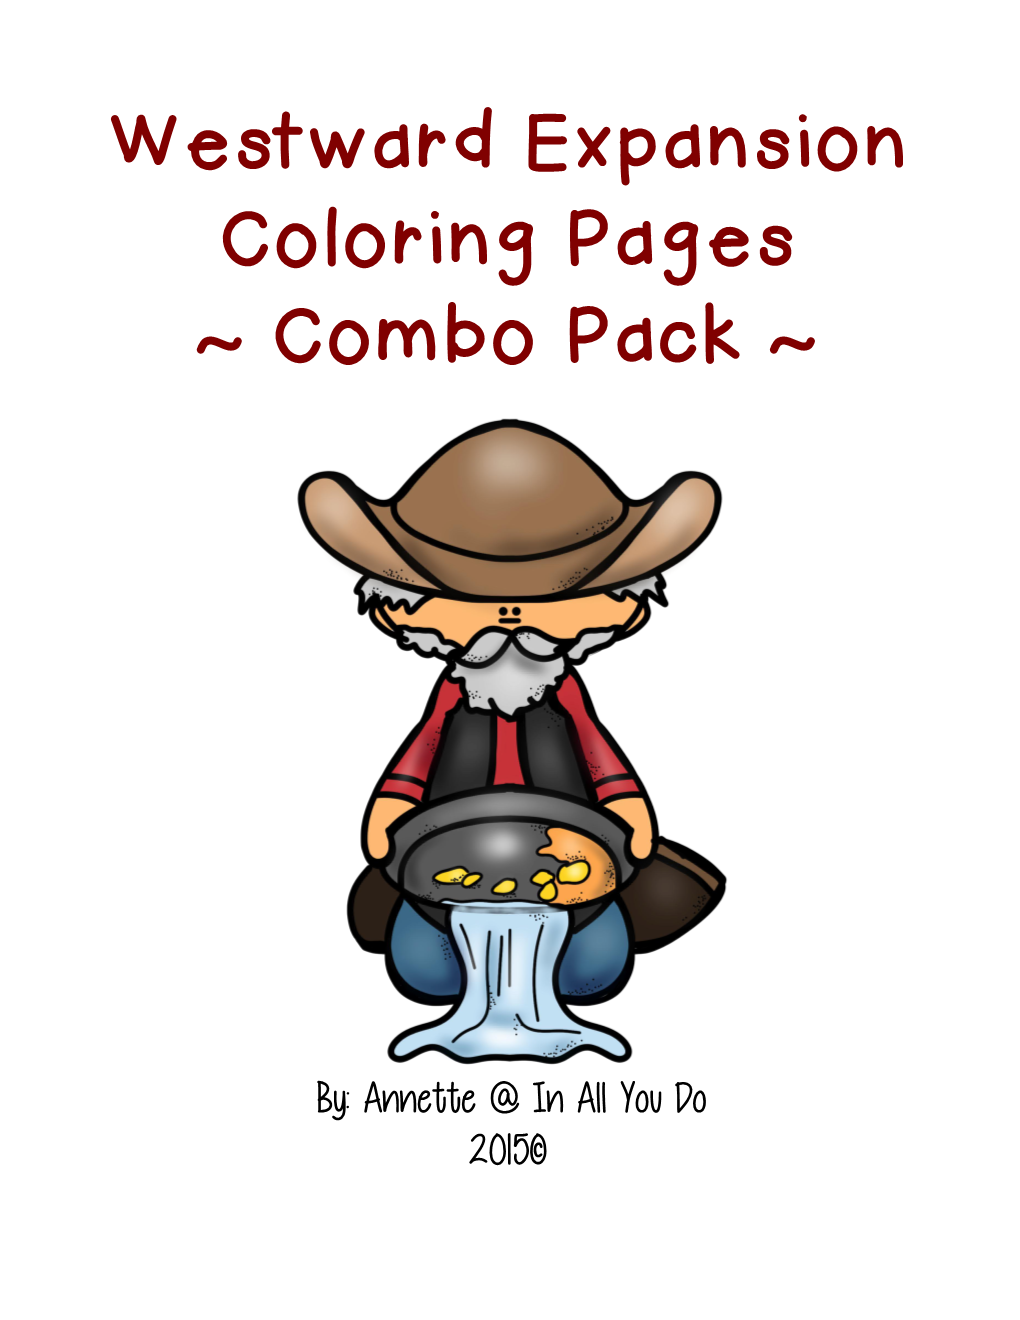 Westward Expansion Coloring Pages ~ Combo Pack ~